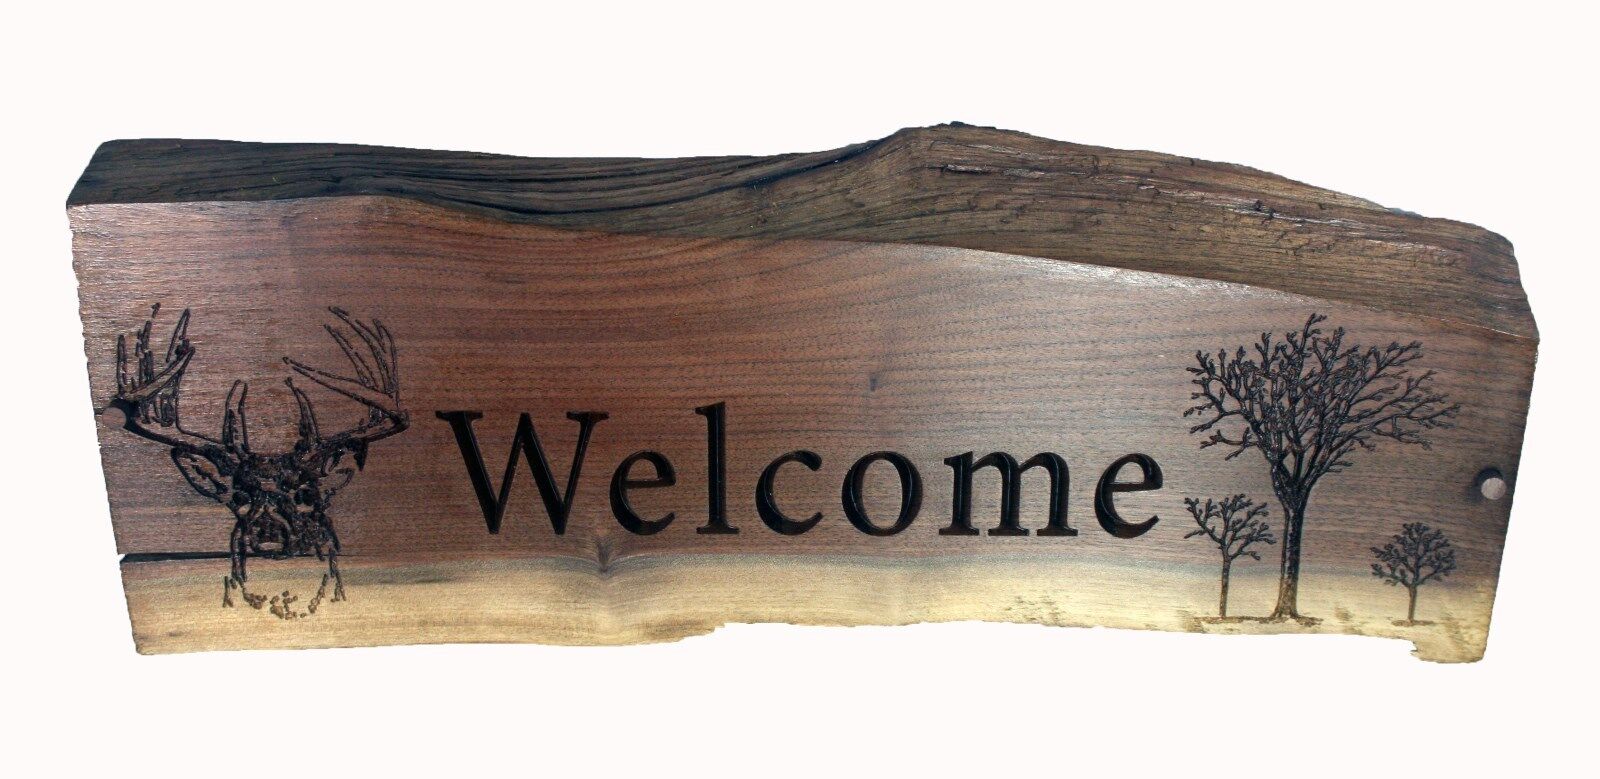 Wele carved solid walnut wood sign rustic country primitive log home decor